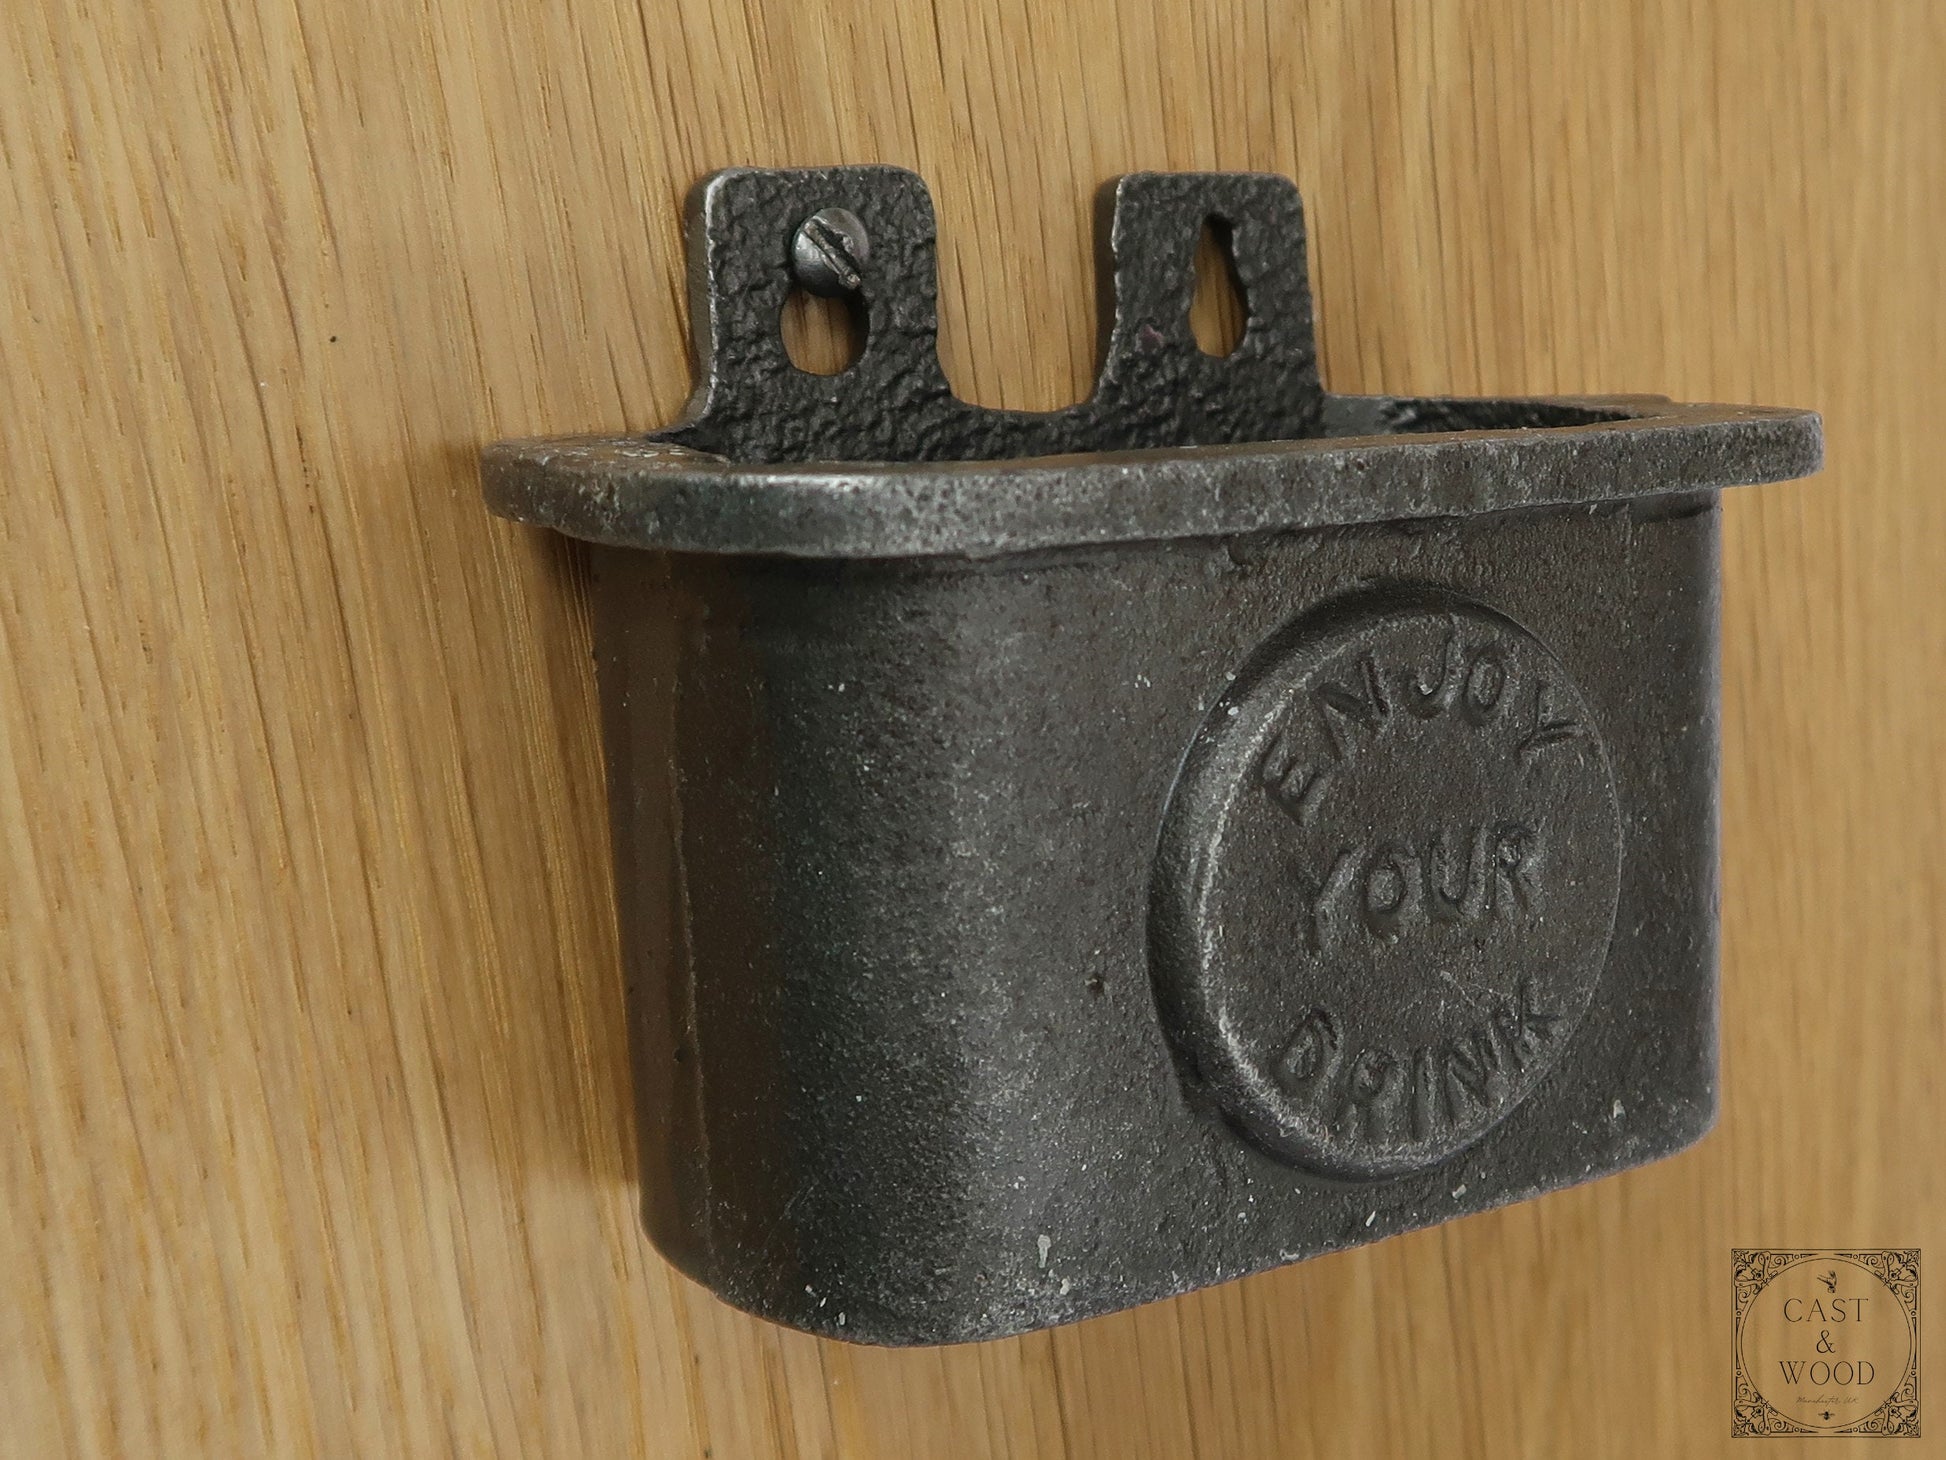 ENJOY YOUR DRINK Cast Iron Wall Mounted Bottle Cap Catcher freeshipping - Cast & Wood